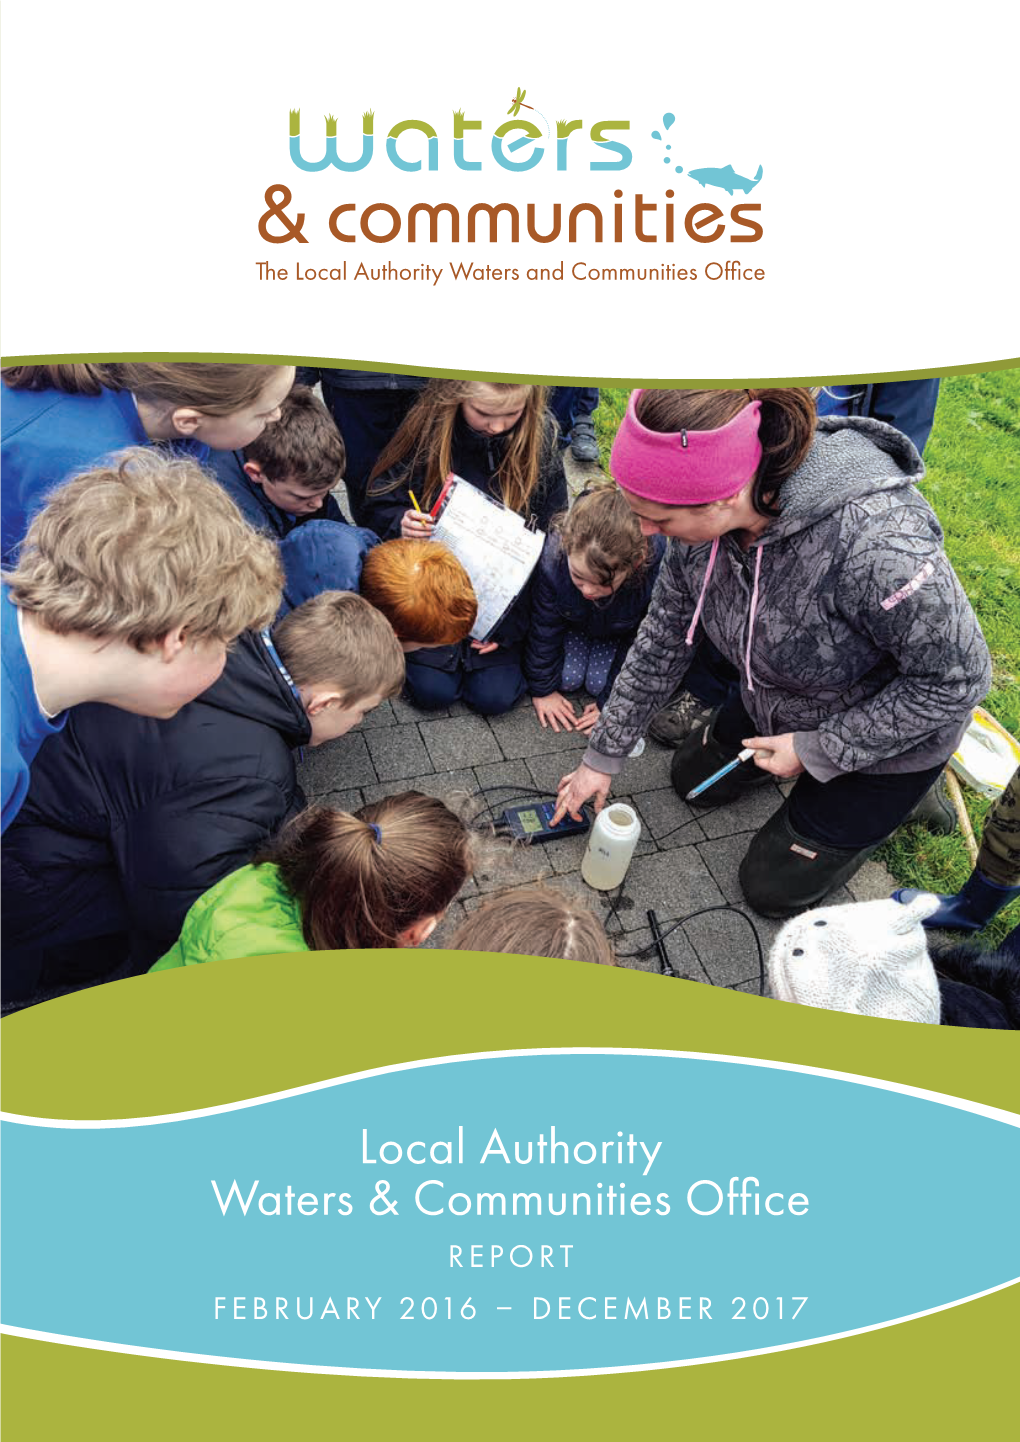 Local Authority Waters & Communities Office